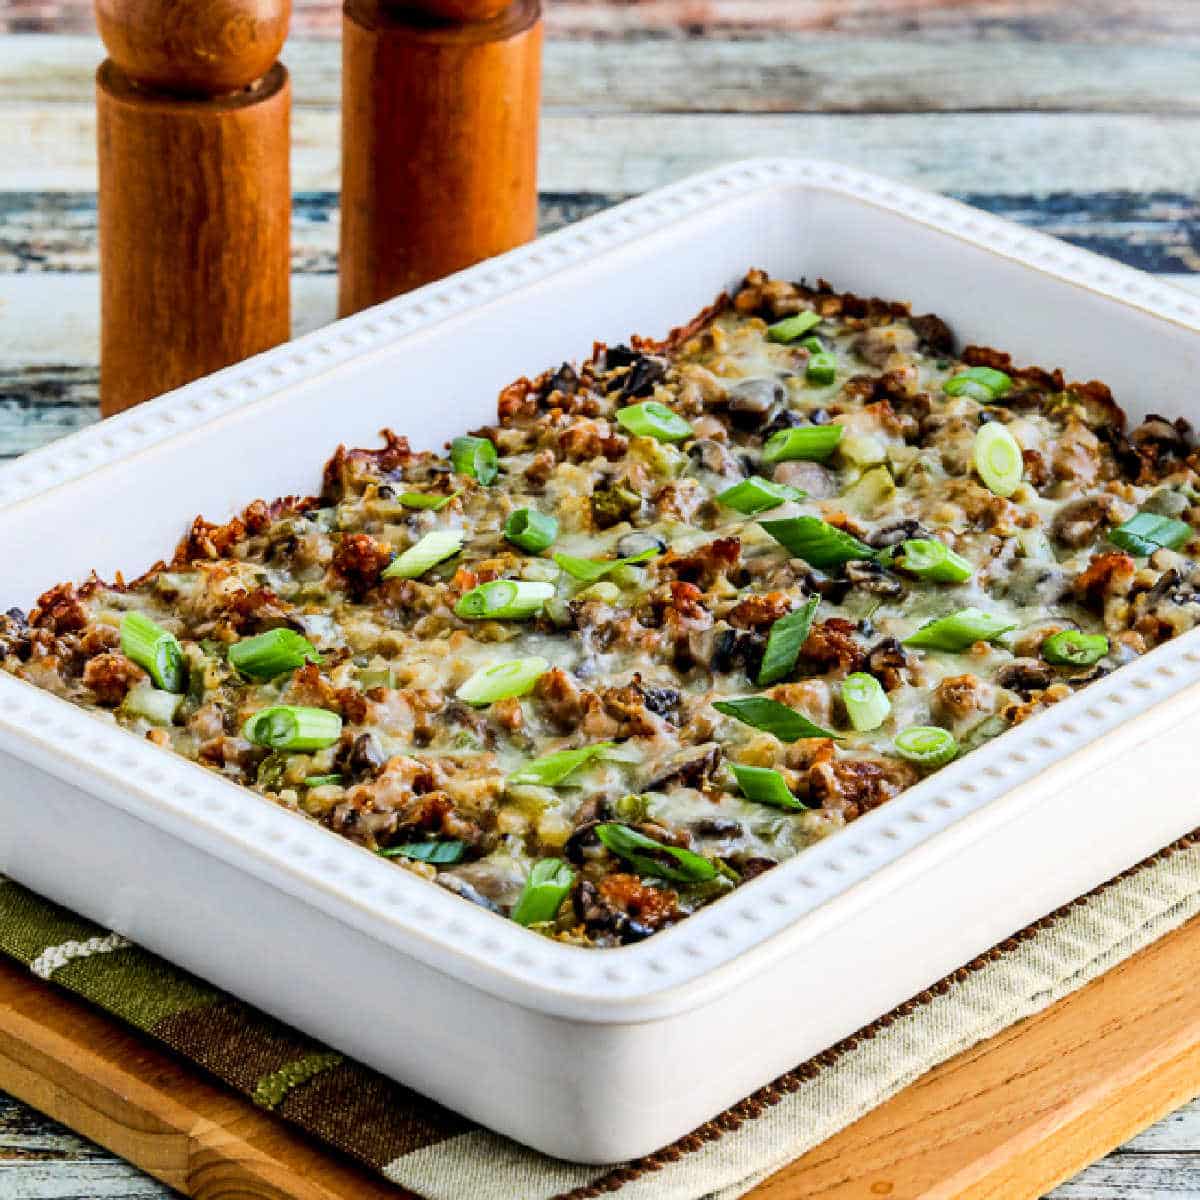 Square image for Cauliflower Rice Sausage Casserole shown in baking dish.